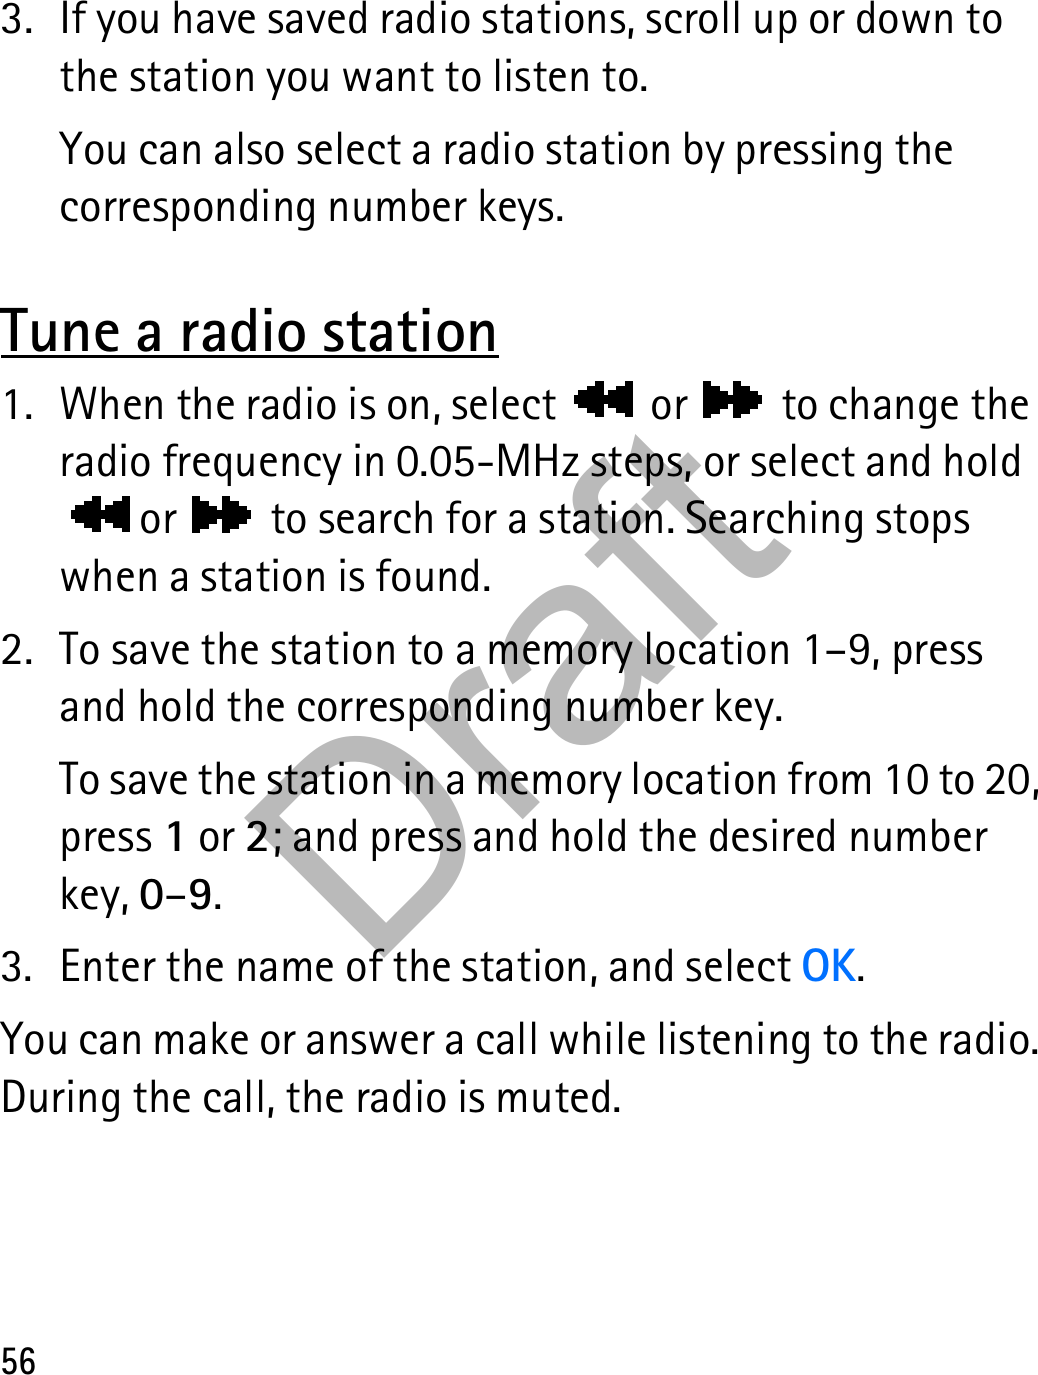 563. If you have saved radio stations, scroll up or down to the station you want to listen to.You can also select a radio station by pressing the corresponding number keys.Tune a radio station1. When the radio is on, select   or   to change the radio frequency in 0.05-MHz steps, or select and hold  or   to search for a station. Searching stops when a station is found.2. To save the station to a memory location 1–9, press and hold the corresponding number key.To save the station in a memory location from 10 to 20, press 1 or 2; and press and hold the desired number key, 0–9.3. Enter the name of the station, and select OK.You can make or answer a call while listening to the radio. During the call, the radio is muted.Draft